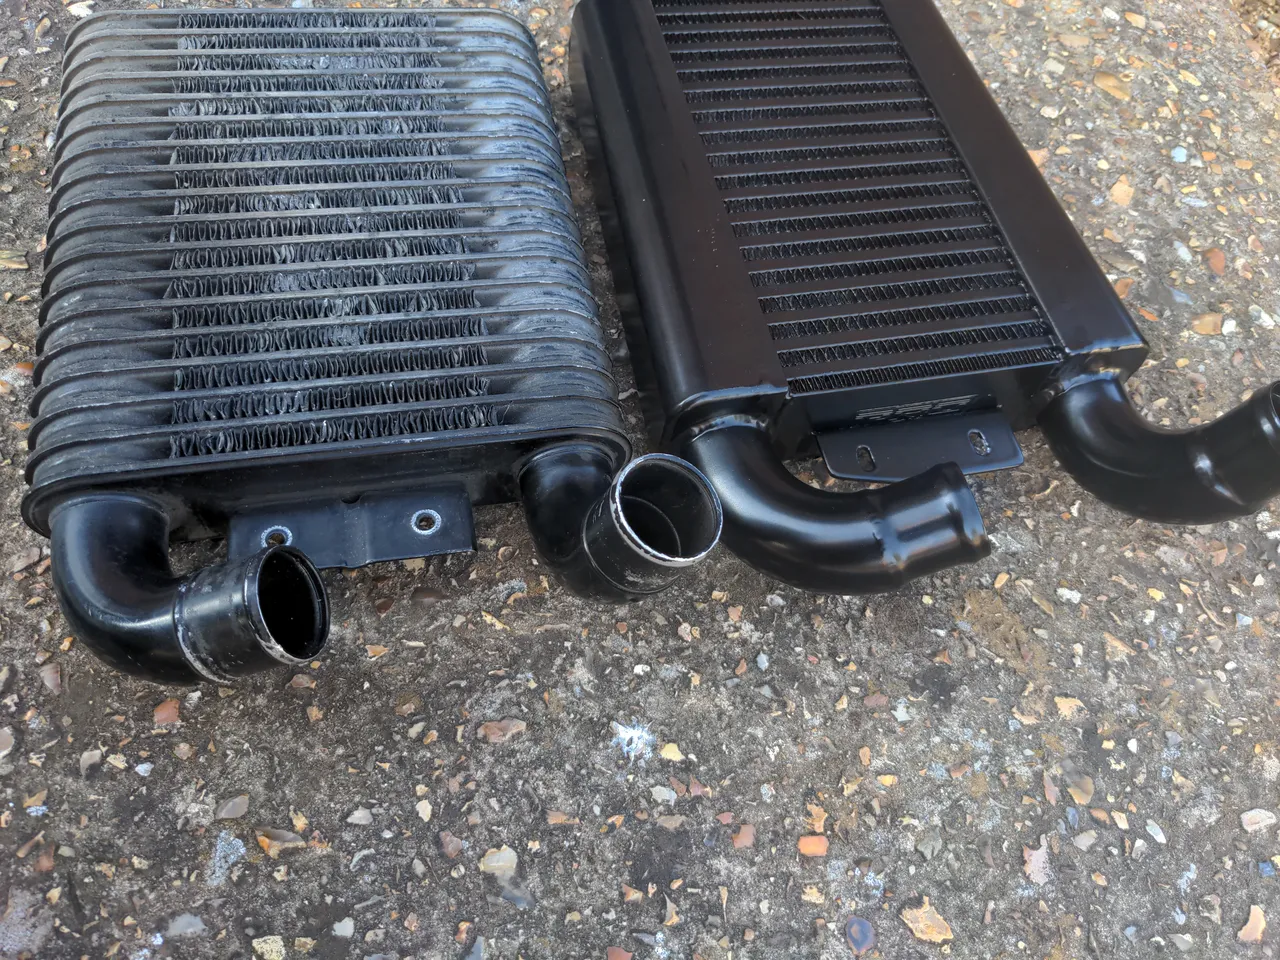 Another comparison view; this time at the top of the intercooler.